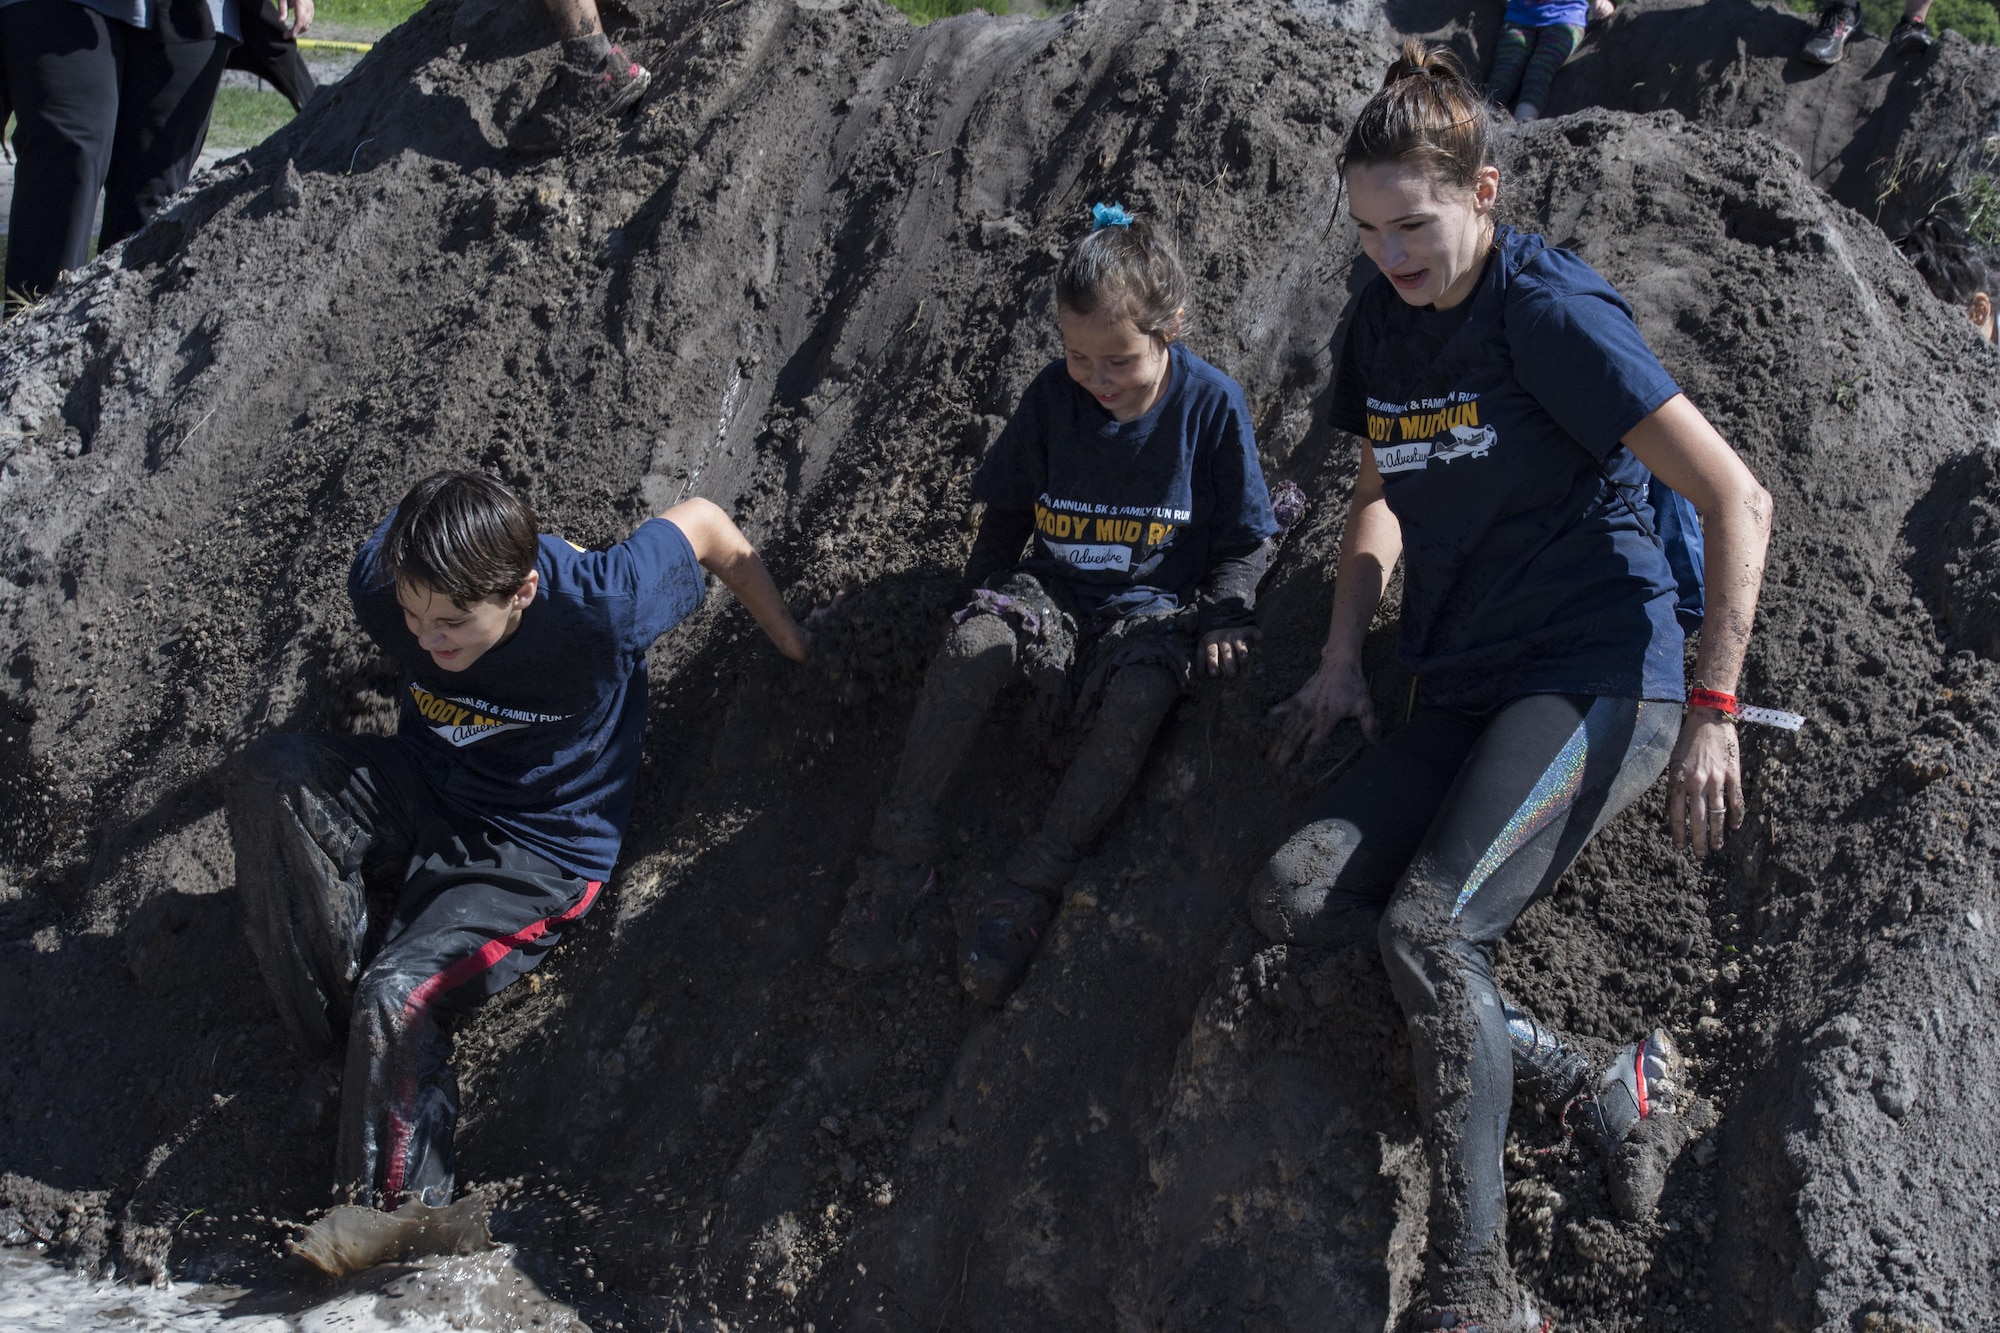 A family slides down a hill during the child’s course of the Moody Mud Run, May 6, 2017, in Ray City, Ga. The Fourth Annual Moody Mud consisted of both adult and child course that challenged more than 600 participants with obstacles over 4.2 miles. (U.S. Air Force photo by Staff Sgt. Eric Summers Jr.)